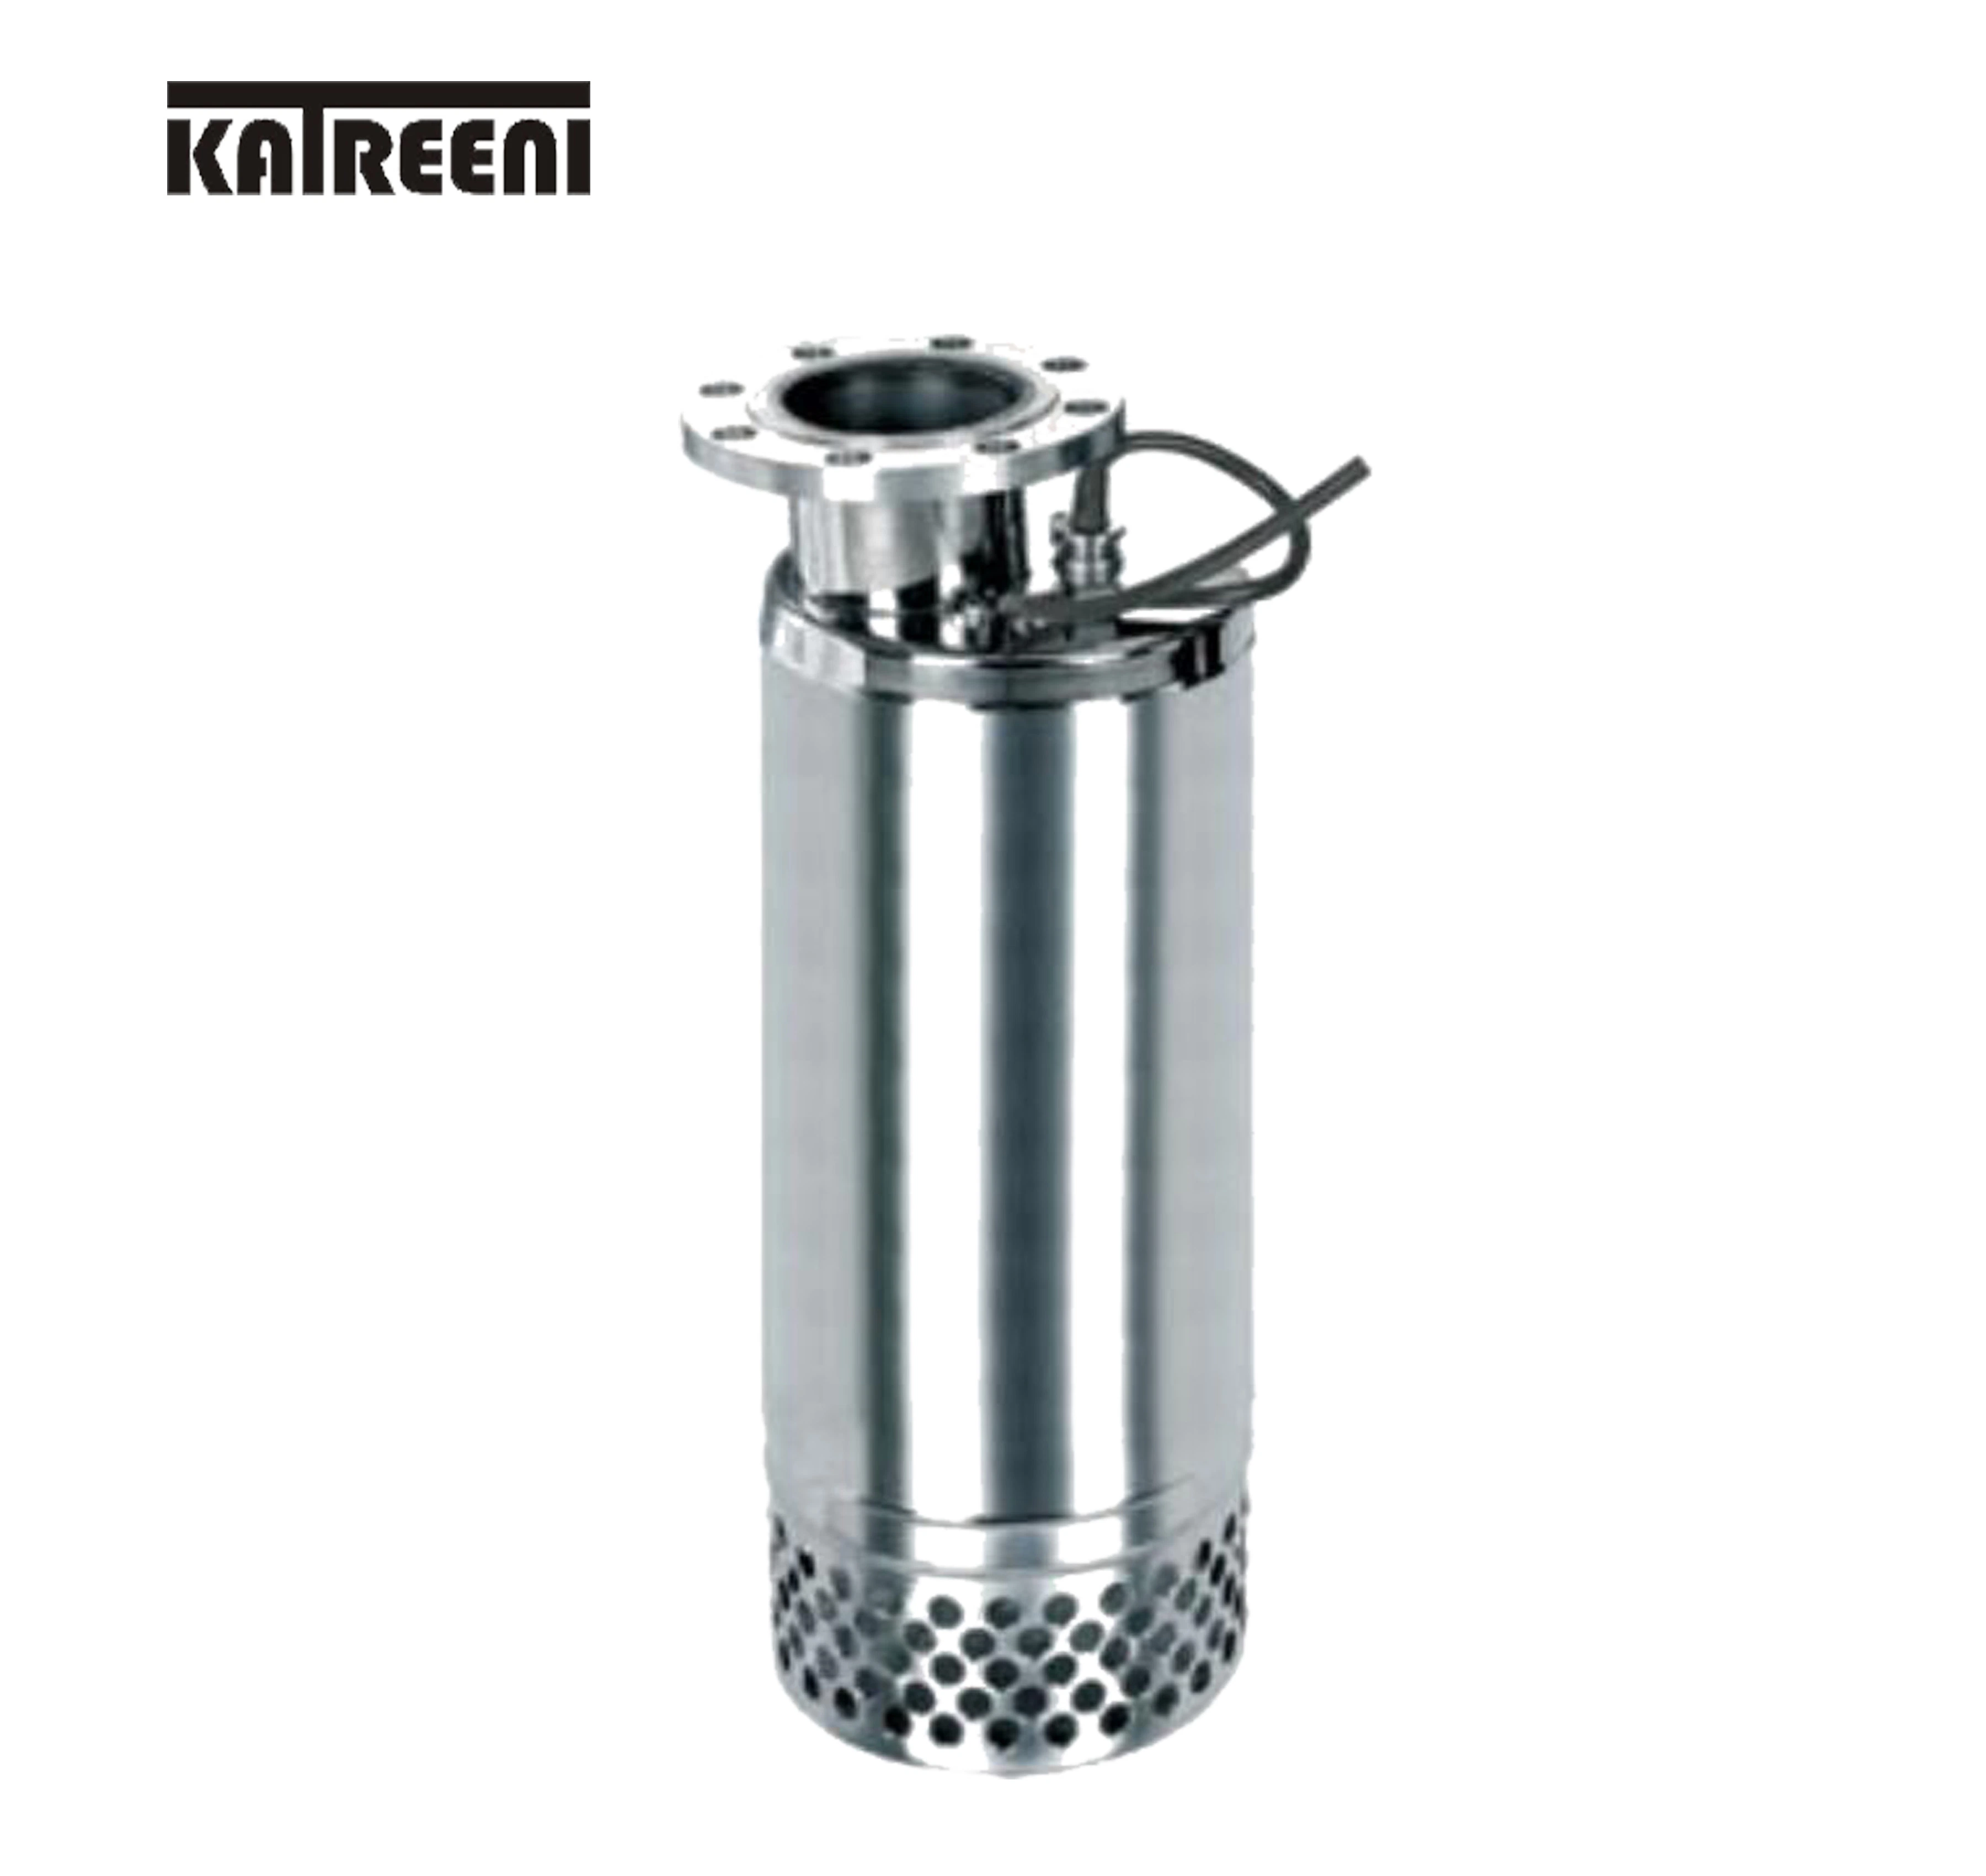 Stainless Steel Three Phase Submersible Water Pump